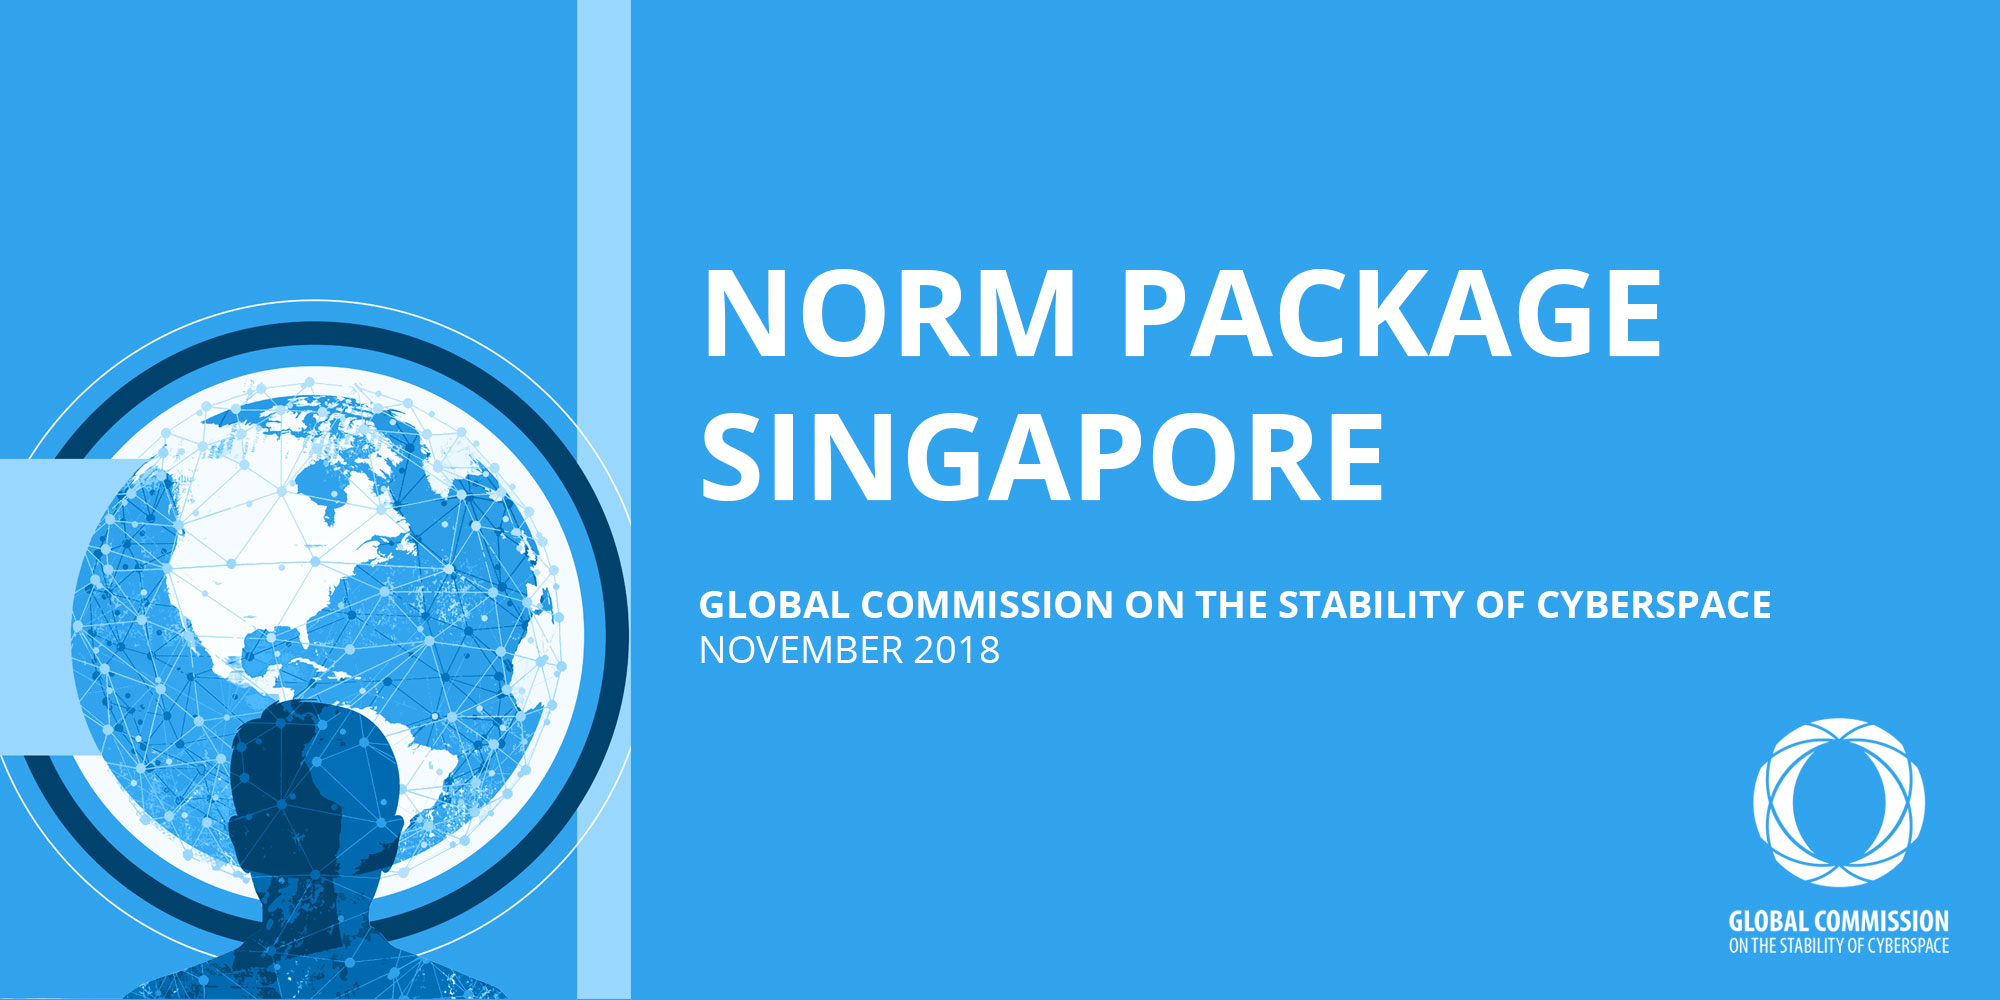  Global Commission Introduces Six Critical Norms Towards Cyber
                  Stability